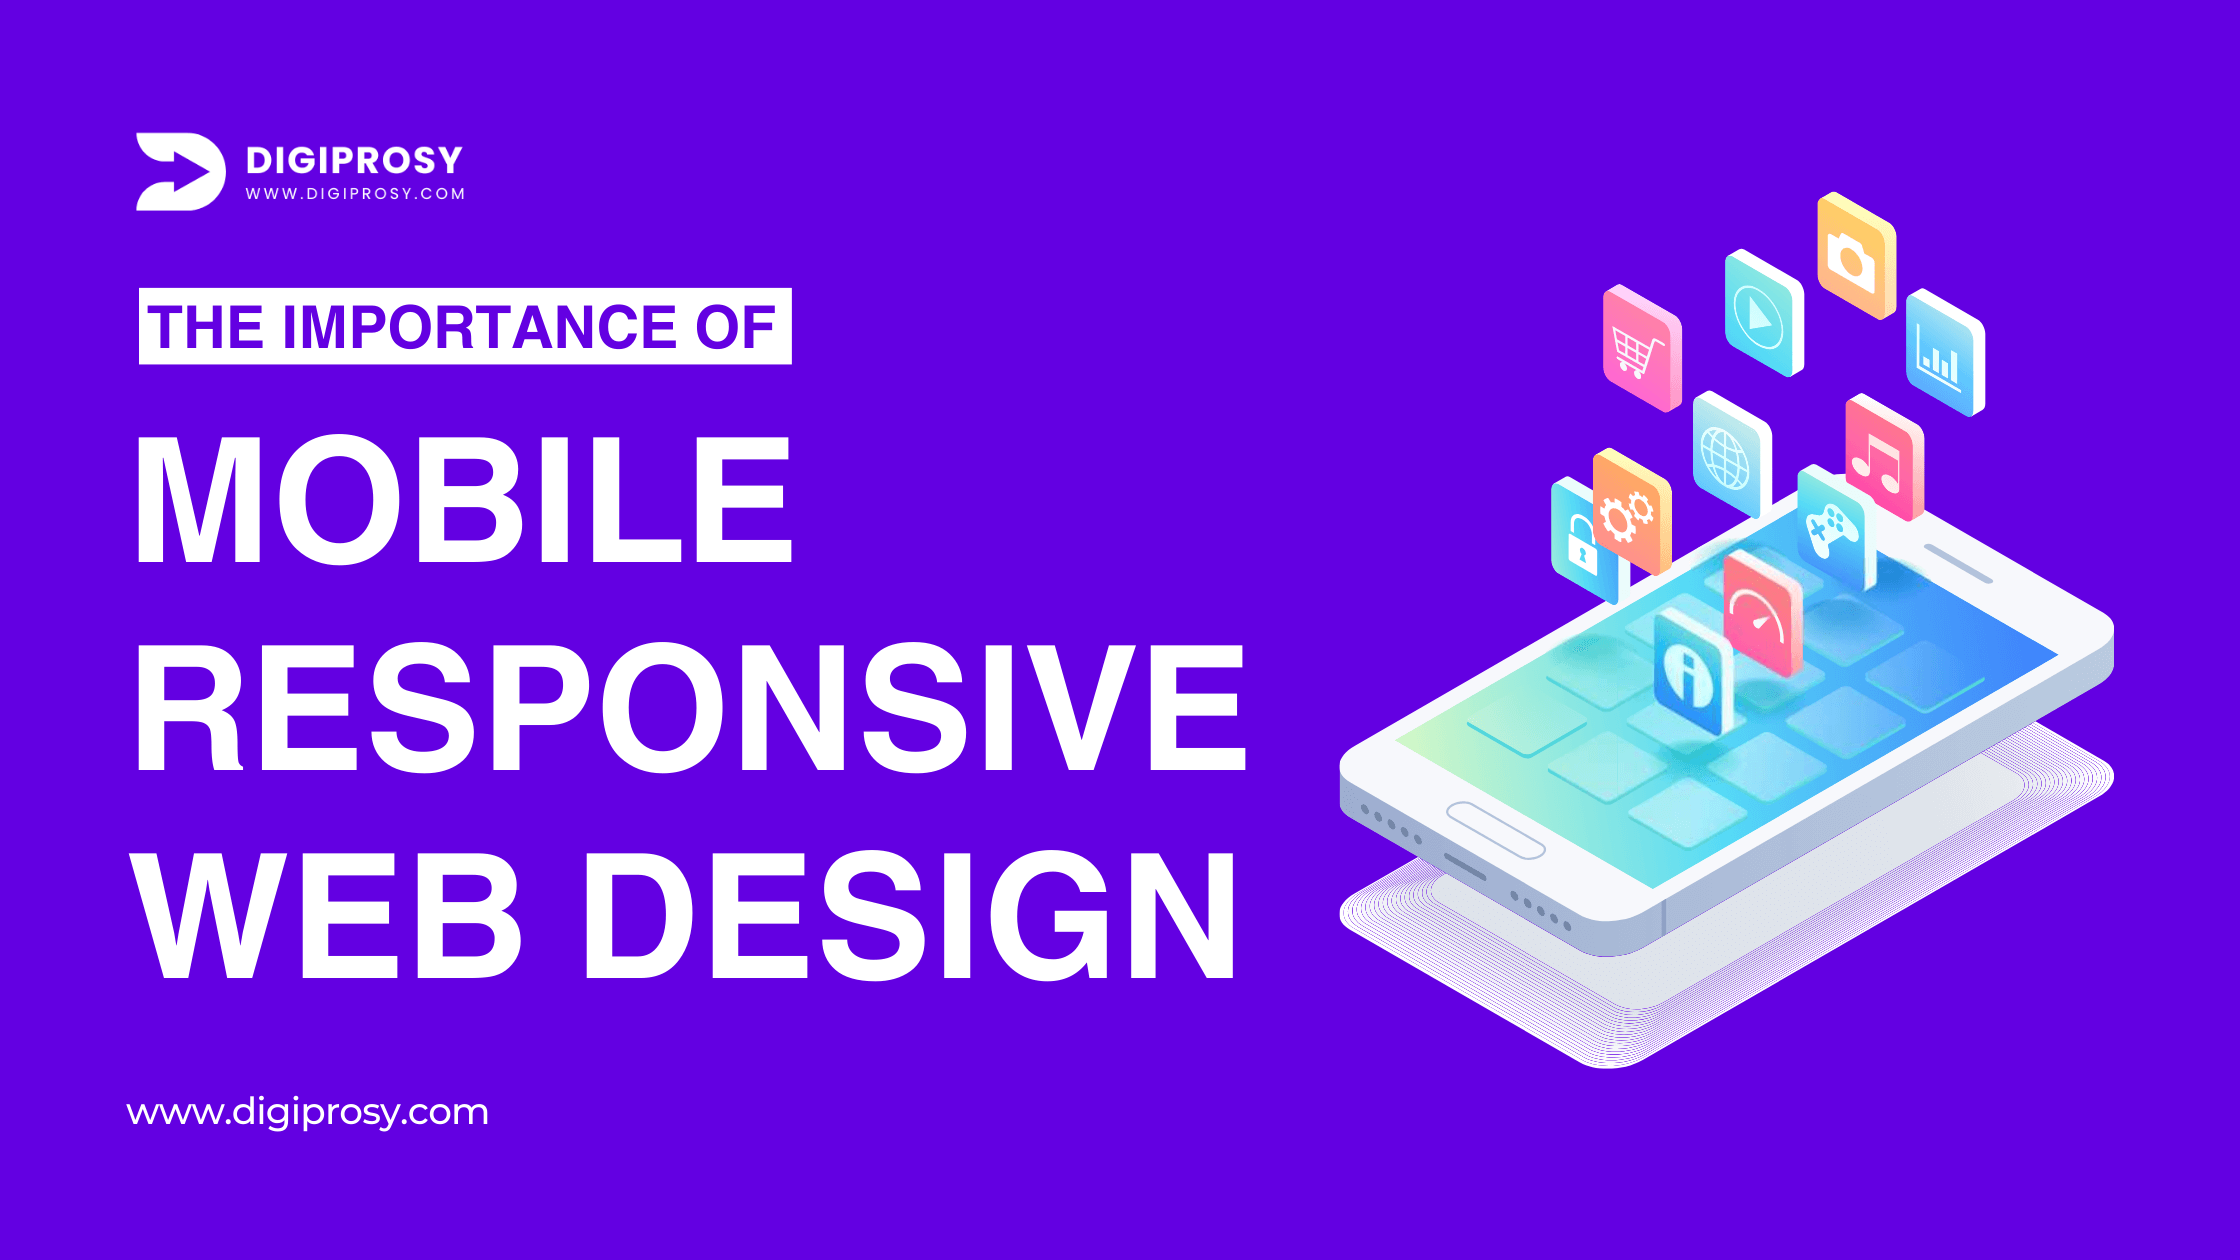 Why Your Website Needs to Be Responsive Web Design for Mobile Users